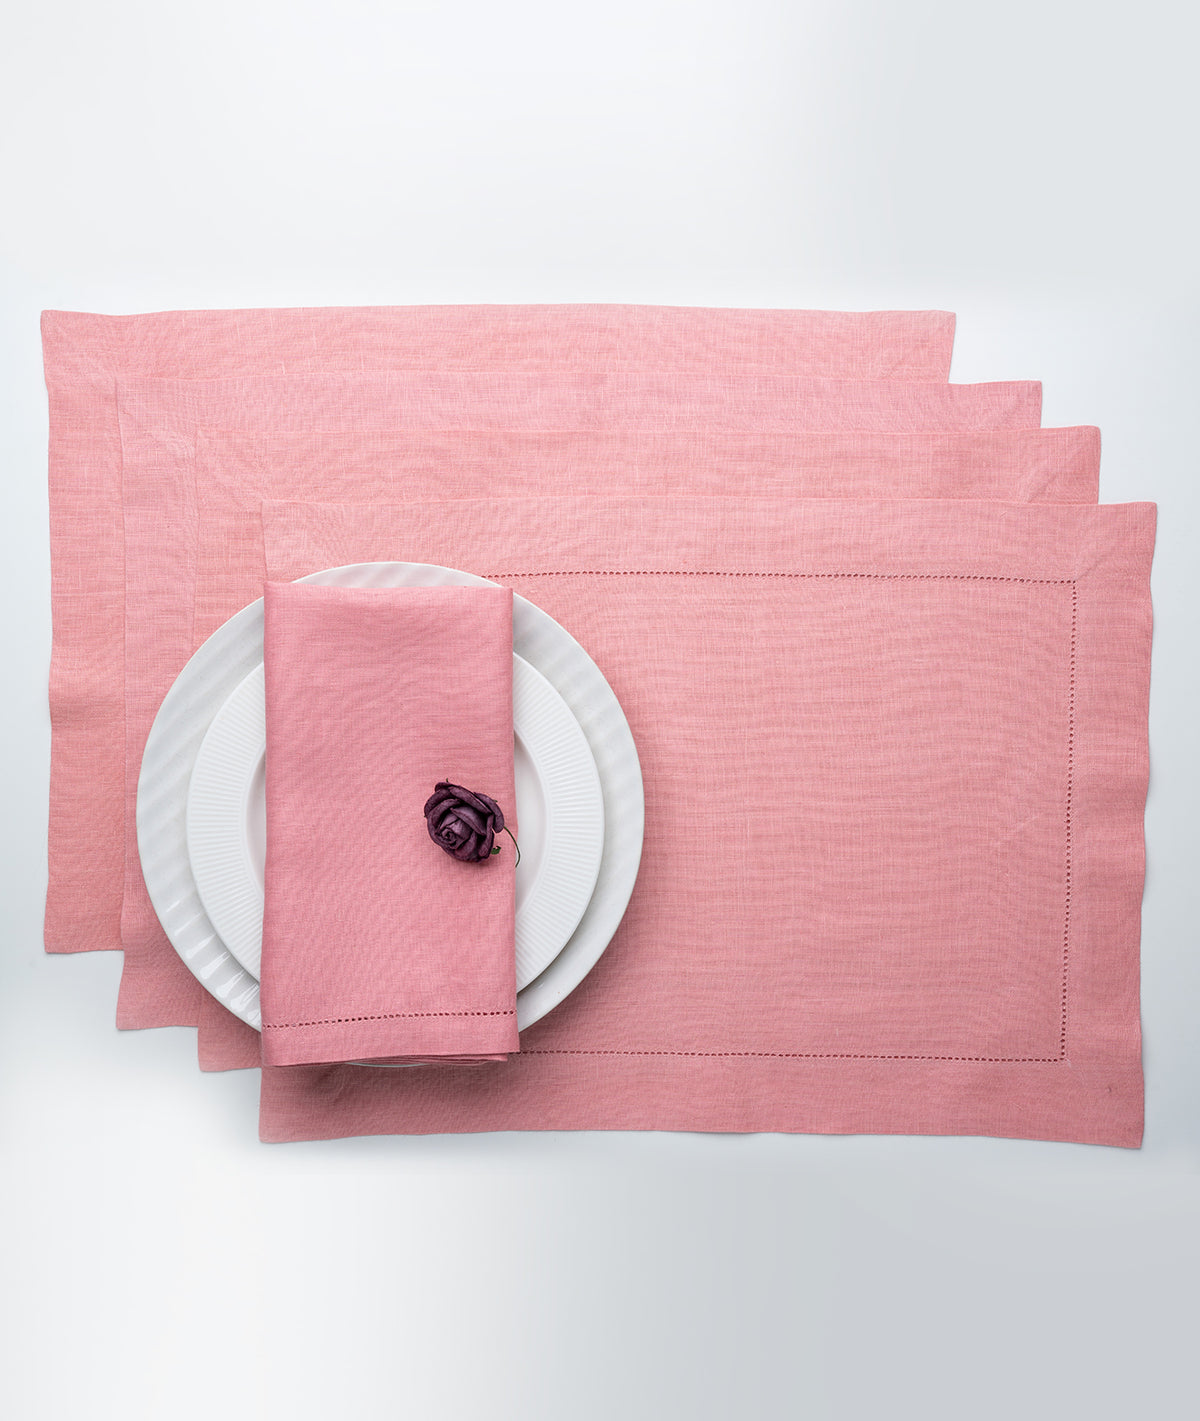 Dusty Pink Linen Placemats 14 x 19 Inch Set of 4 - Hemstitch